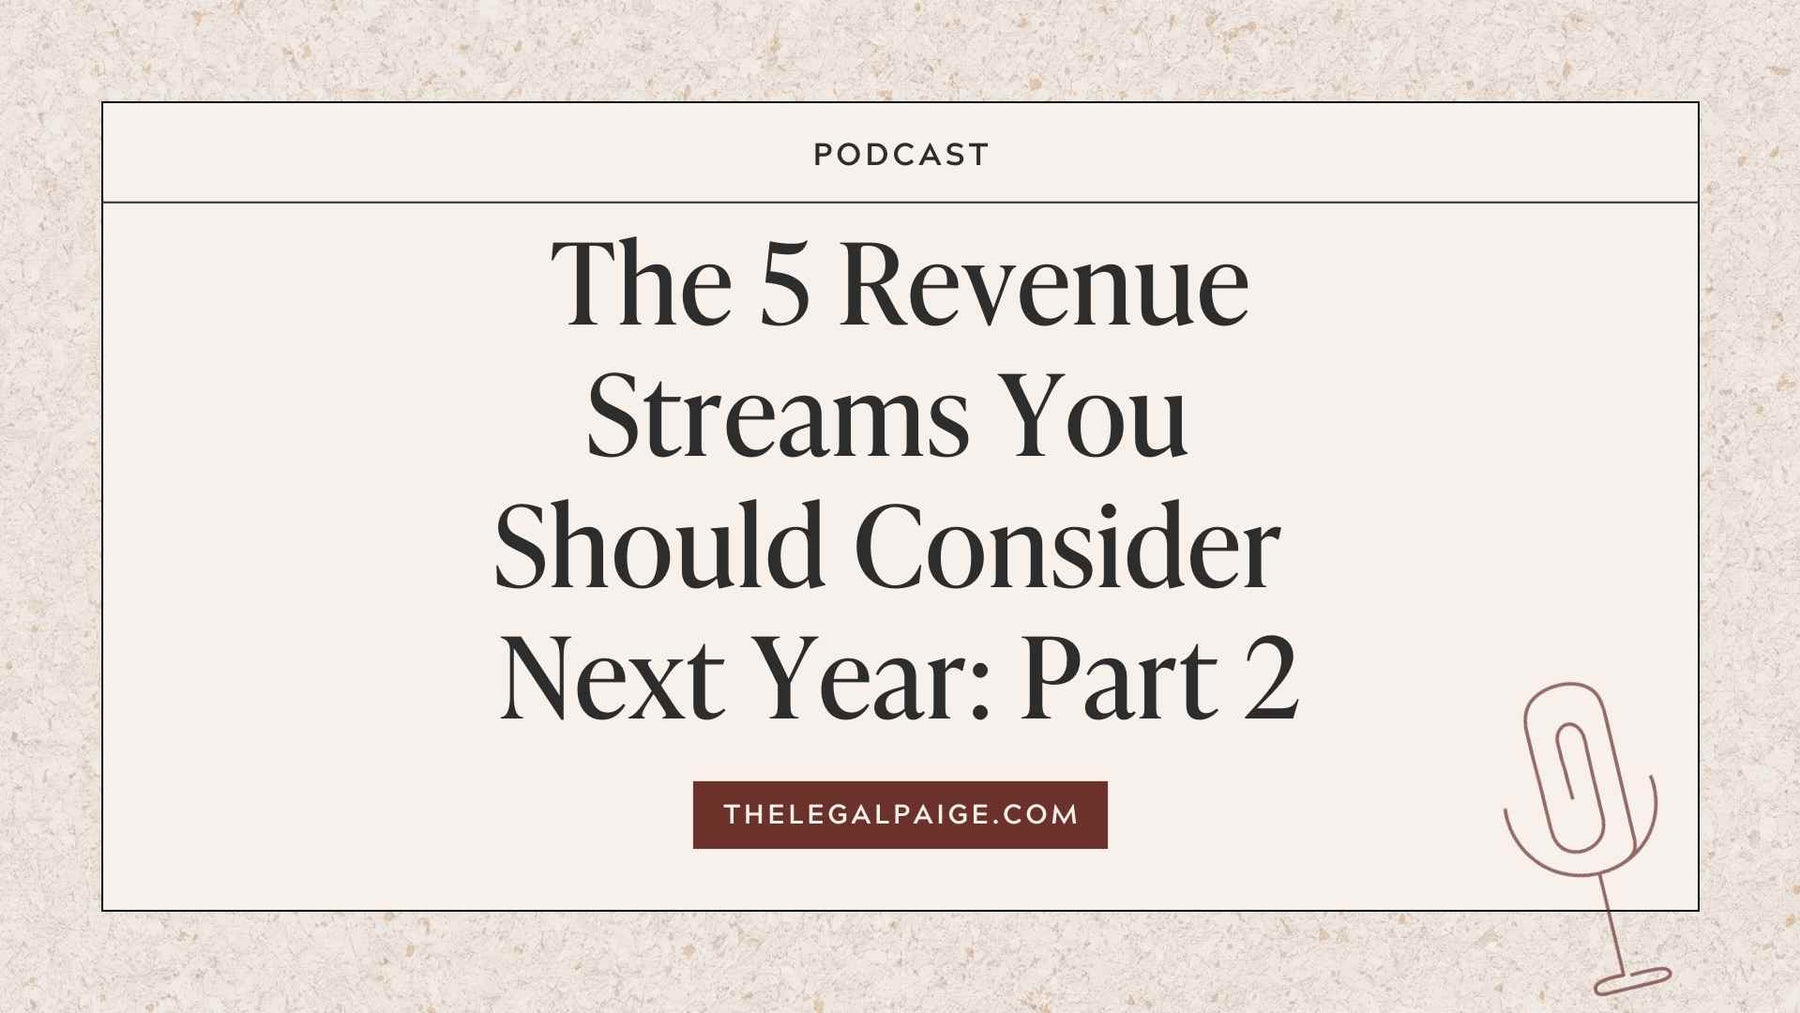 The Legal Paige Podcast - Episode 144 - The 5 Revenue Streams You Should Consider Next Year: Part 2